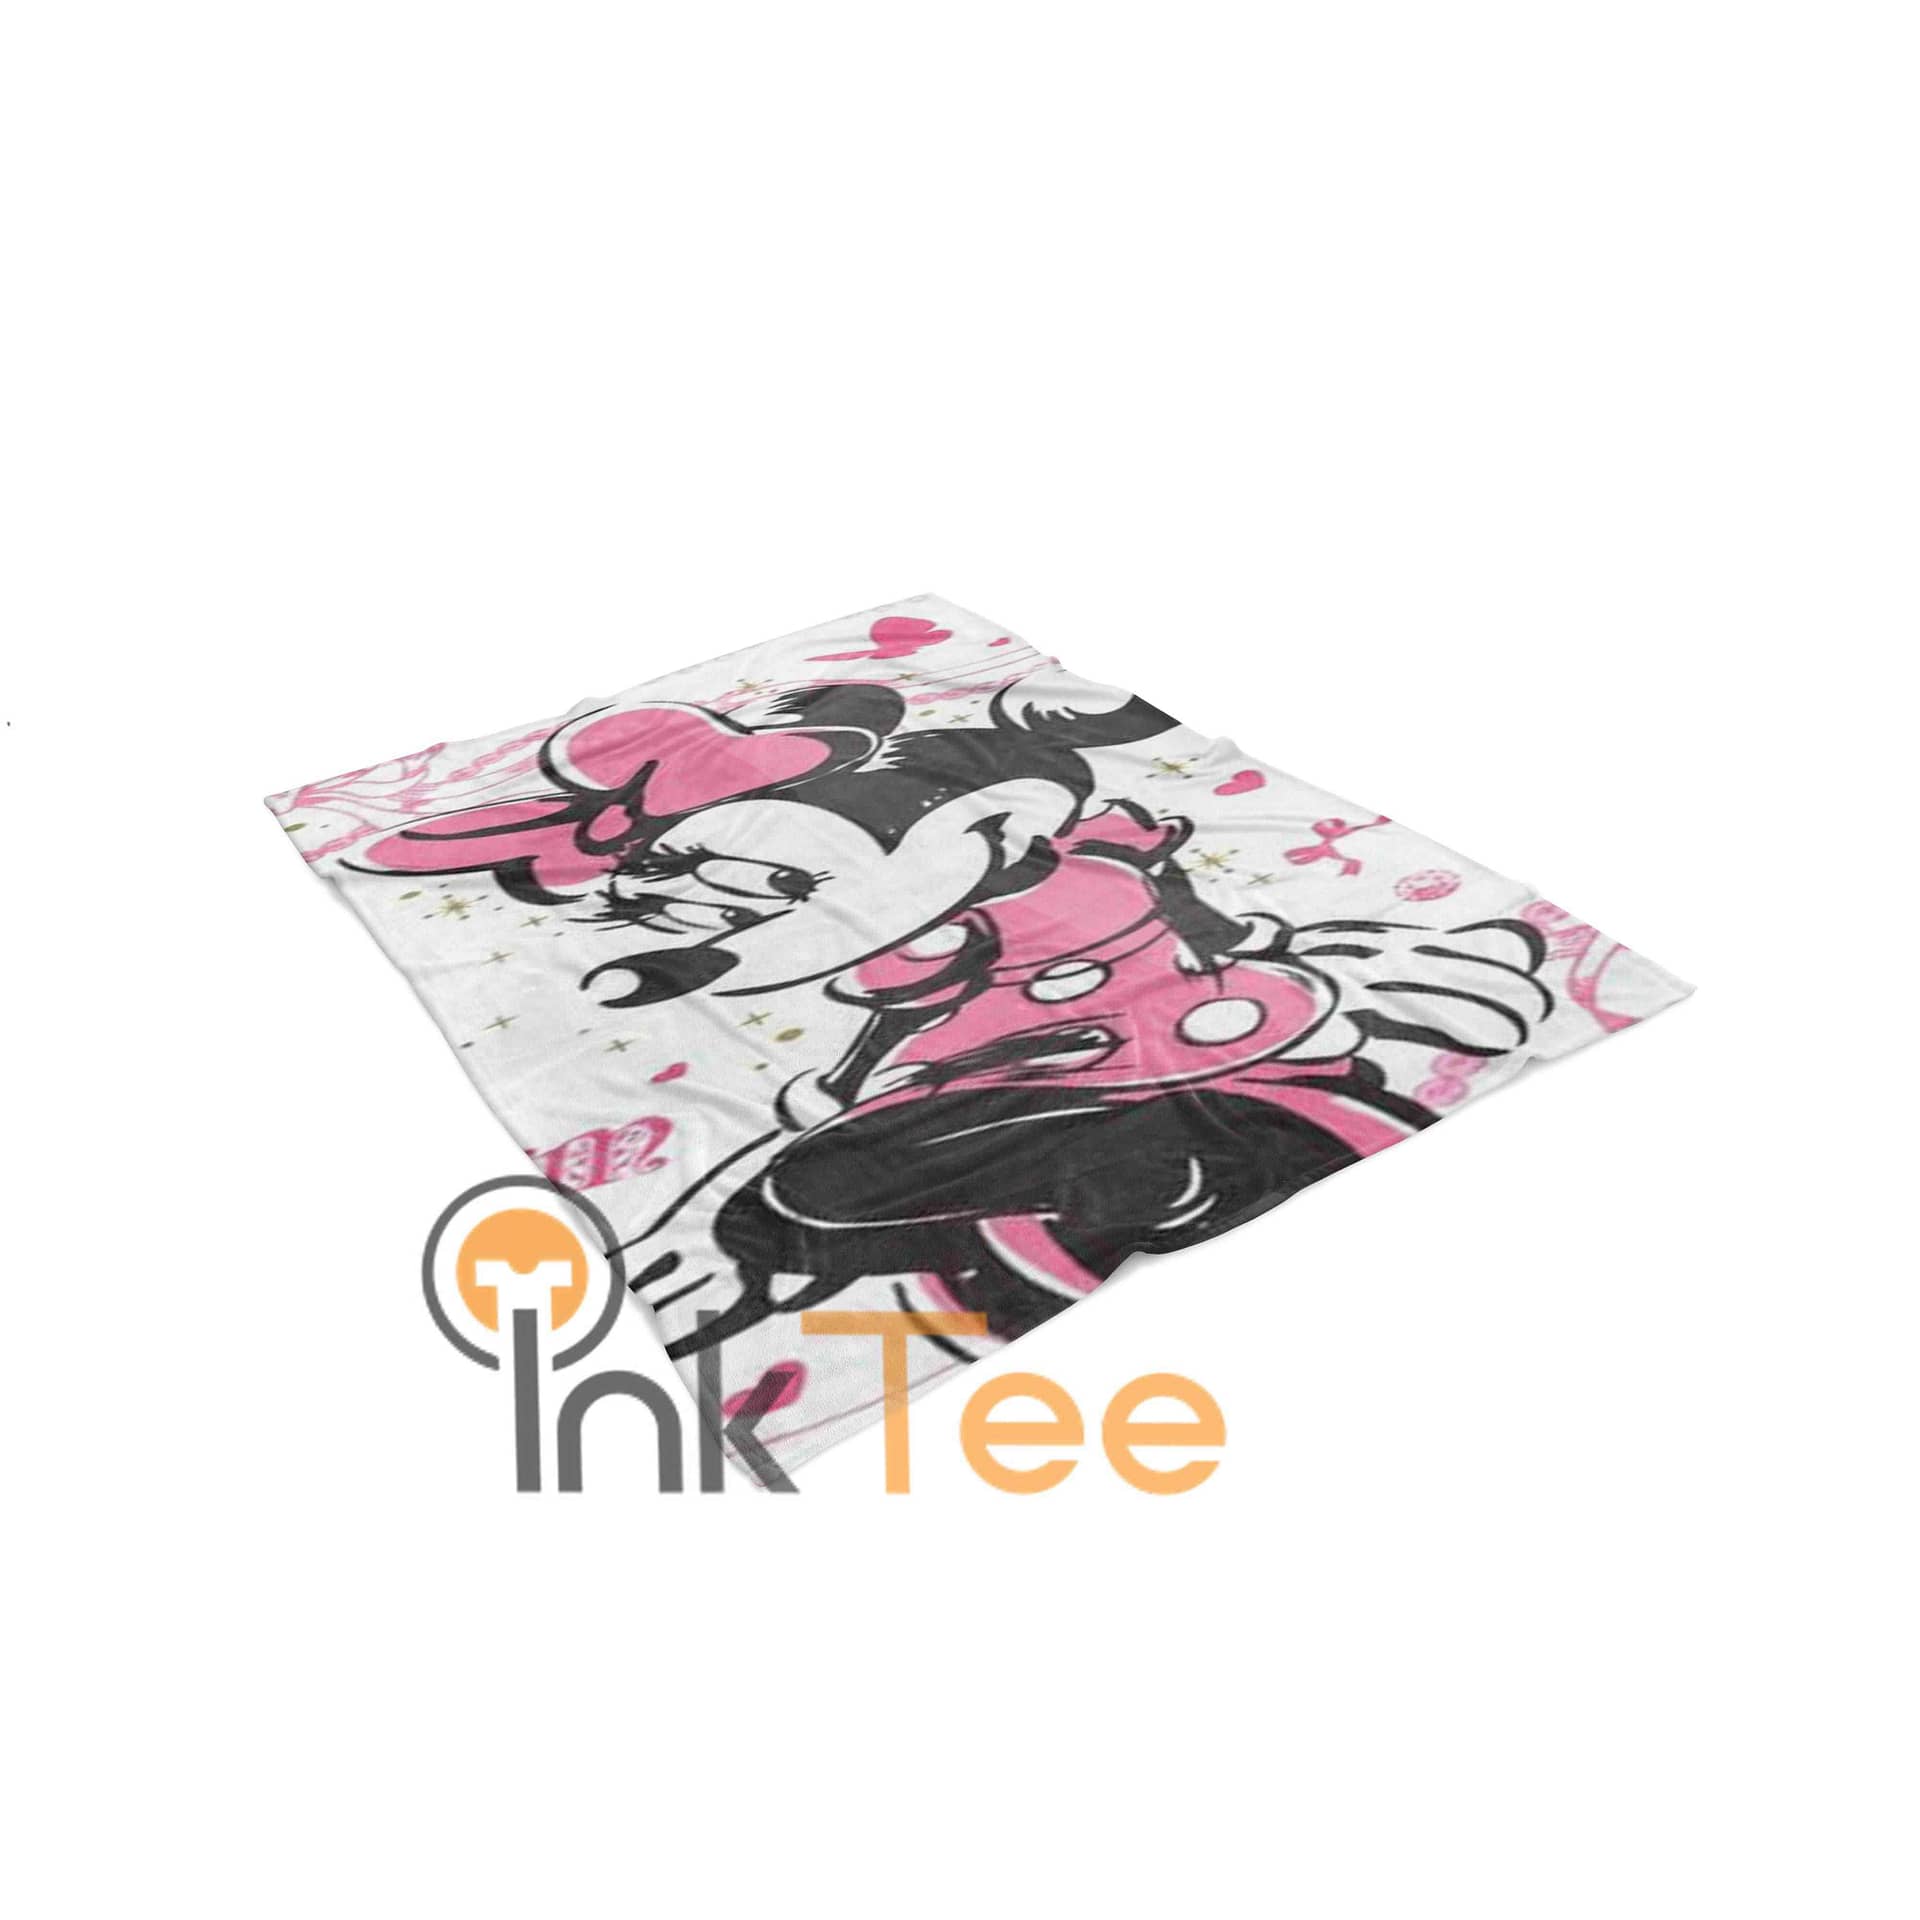 Inktee Store - Cute Minnie Mouse Limited Edition Area Amazon Best Seller 4105 Fleece Blanket Image